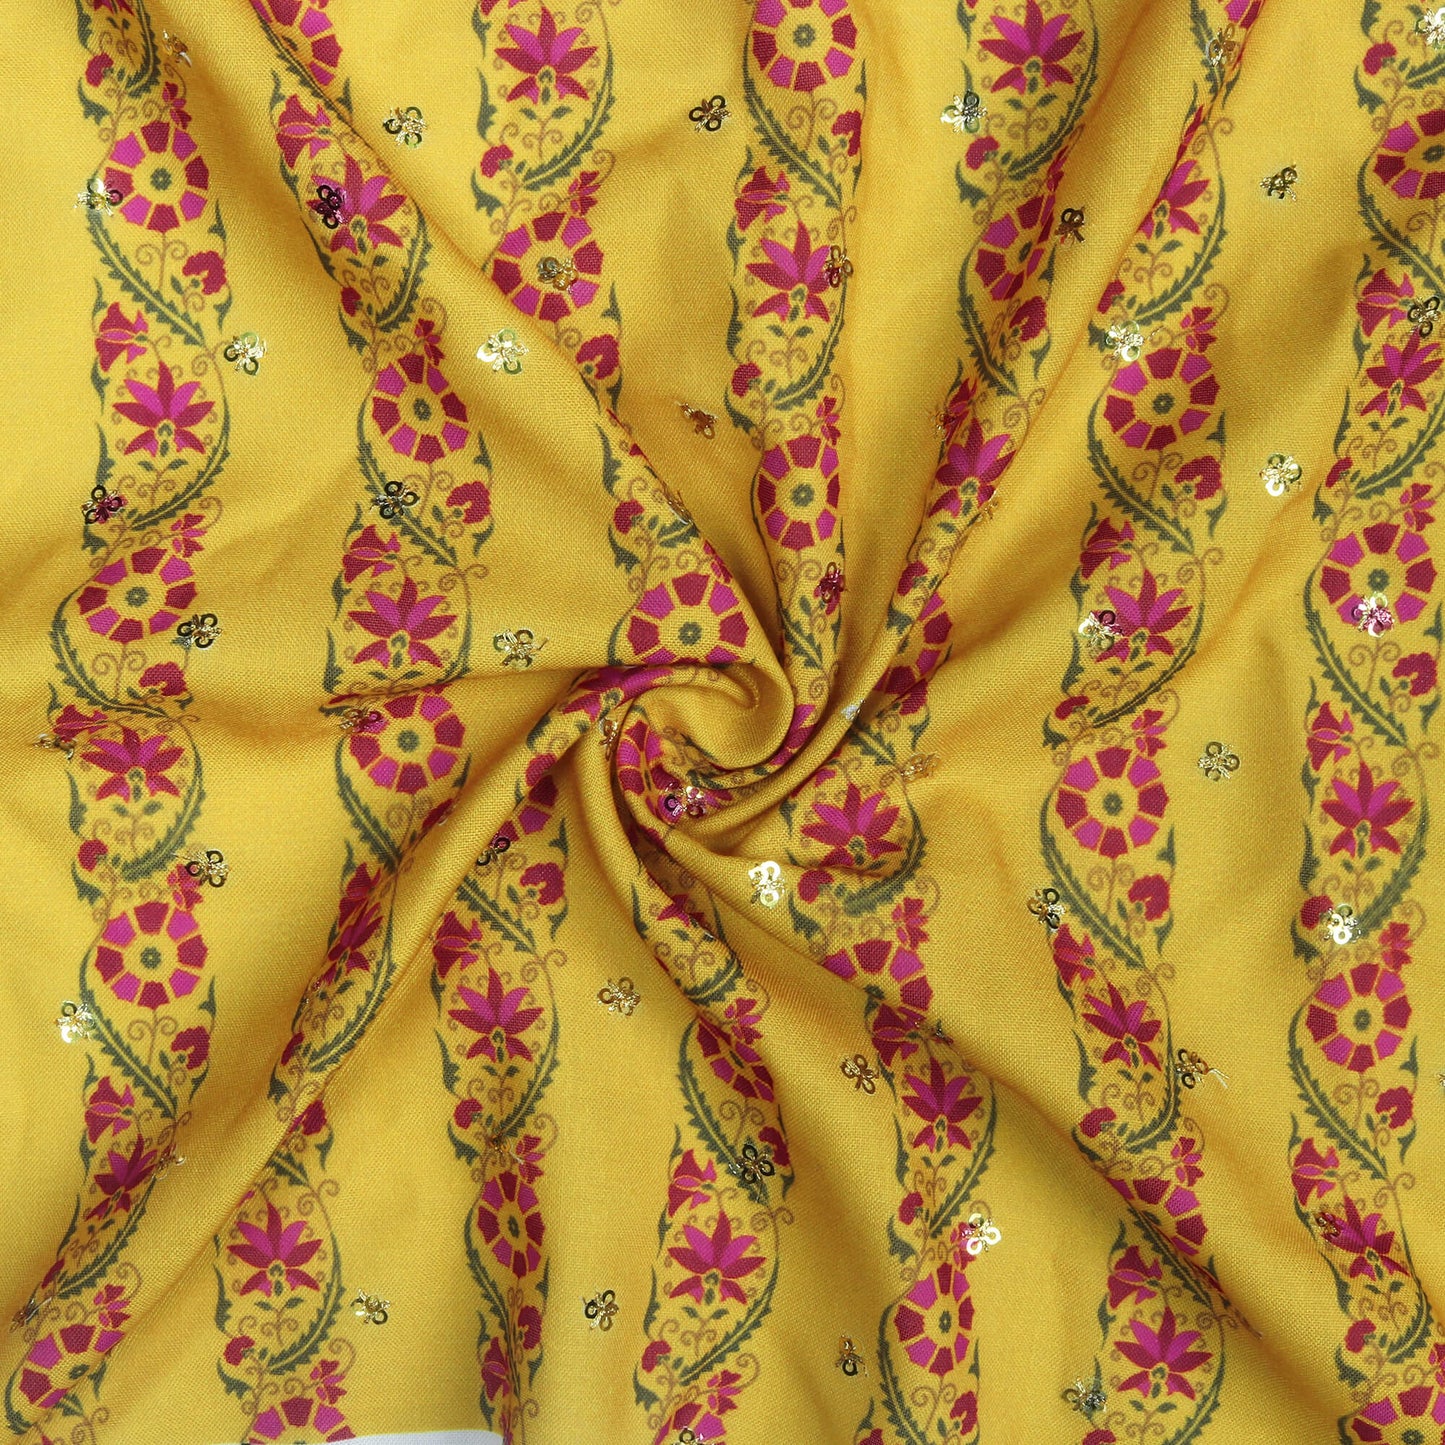 Pineapple Yellow And Magenta Pink Stripes Pattern Digital Print Booti Sequins Poly Rayon Fabric